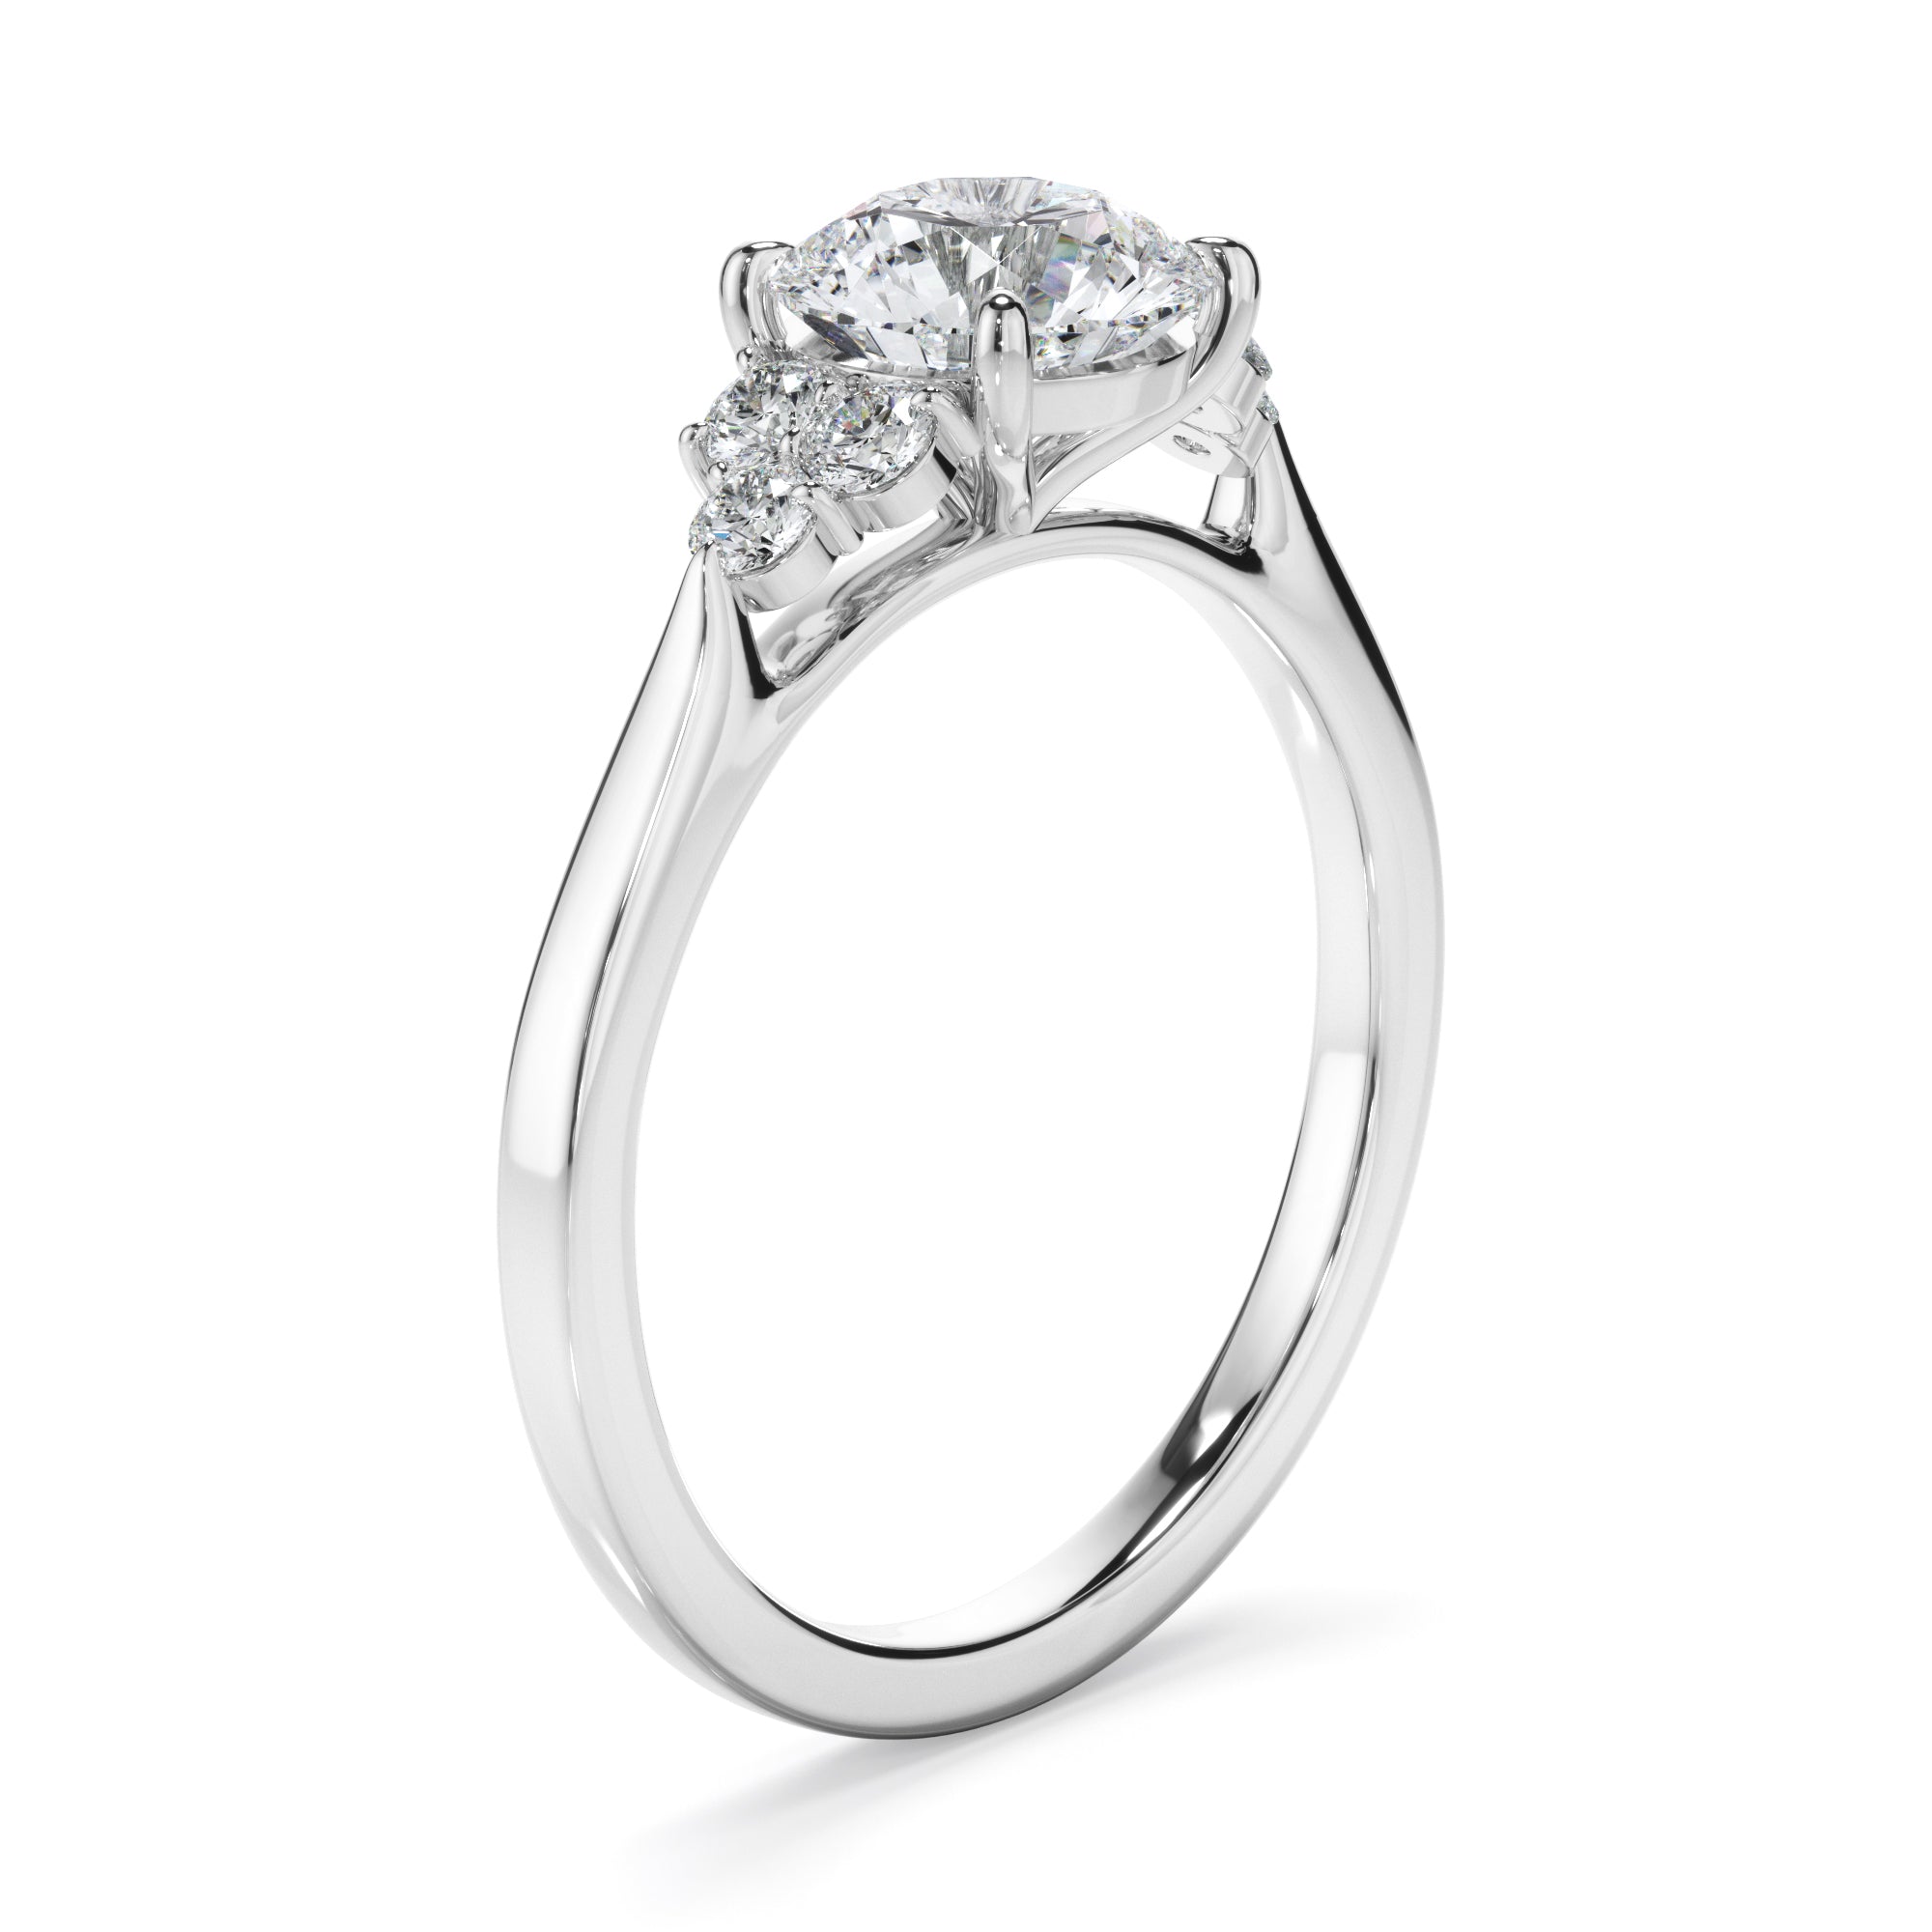 Round Brilliant Cut Diamond Engagement Ring With Diamond Cluster Sides